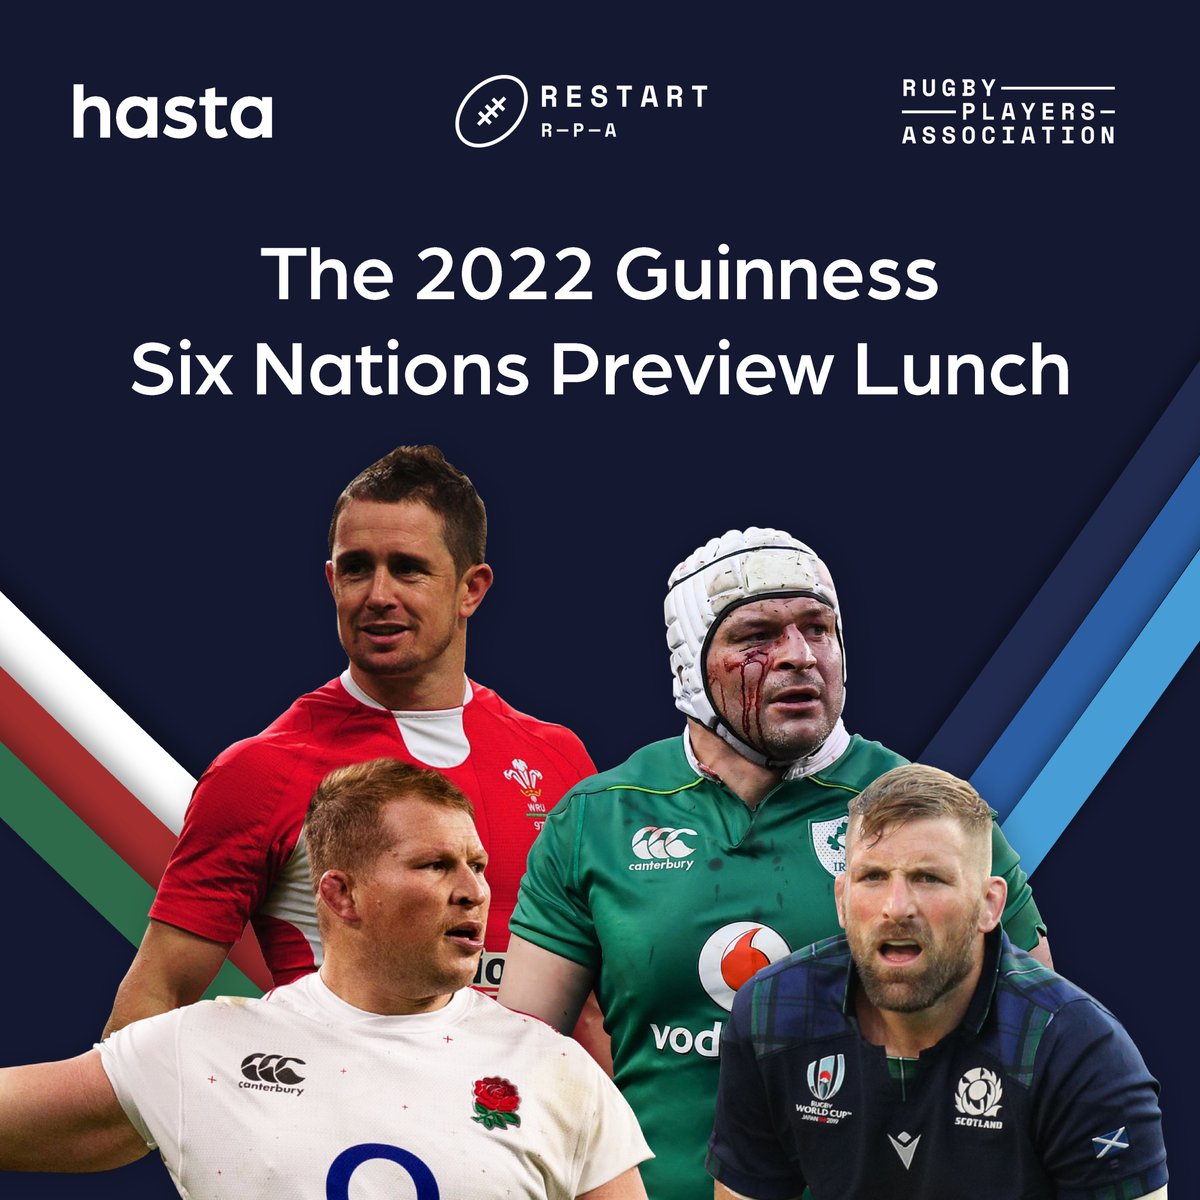 Delighted to announce rugby legends @RoryBest2 OBE, @ShaneWilliams11 MBE, @johnbarc86 and @DylanHartley will be joining us at The Londoner on Wednesday alongside our charity partners @theRPA and @RestartRugby for the Six Nations Preview Lunch.